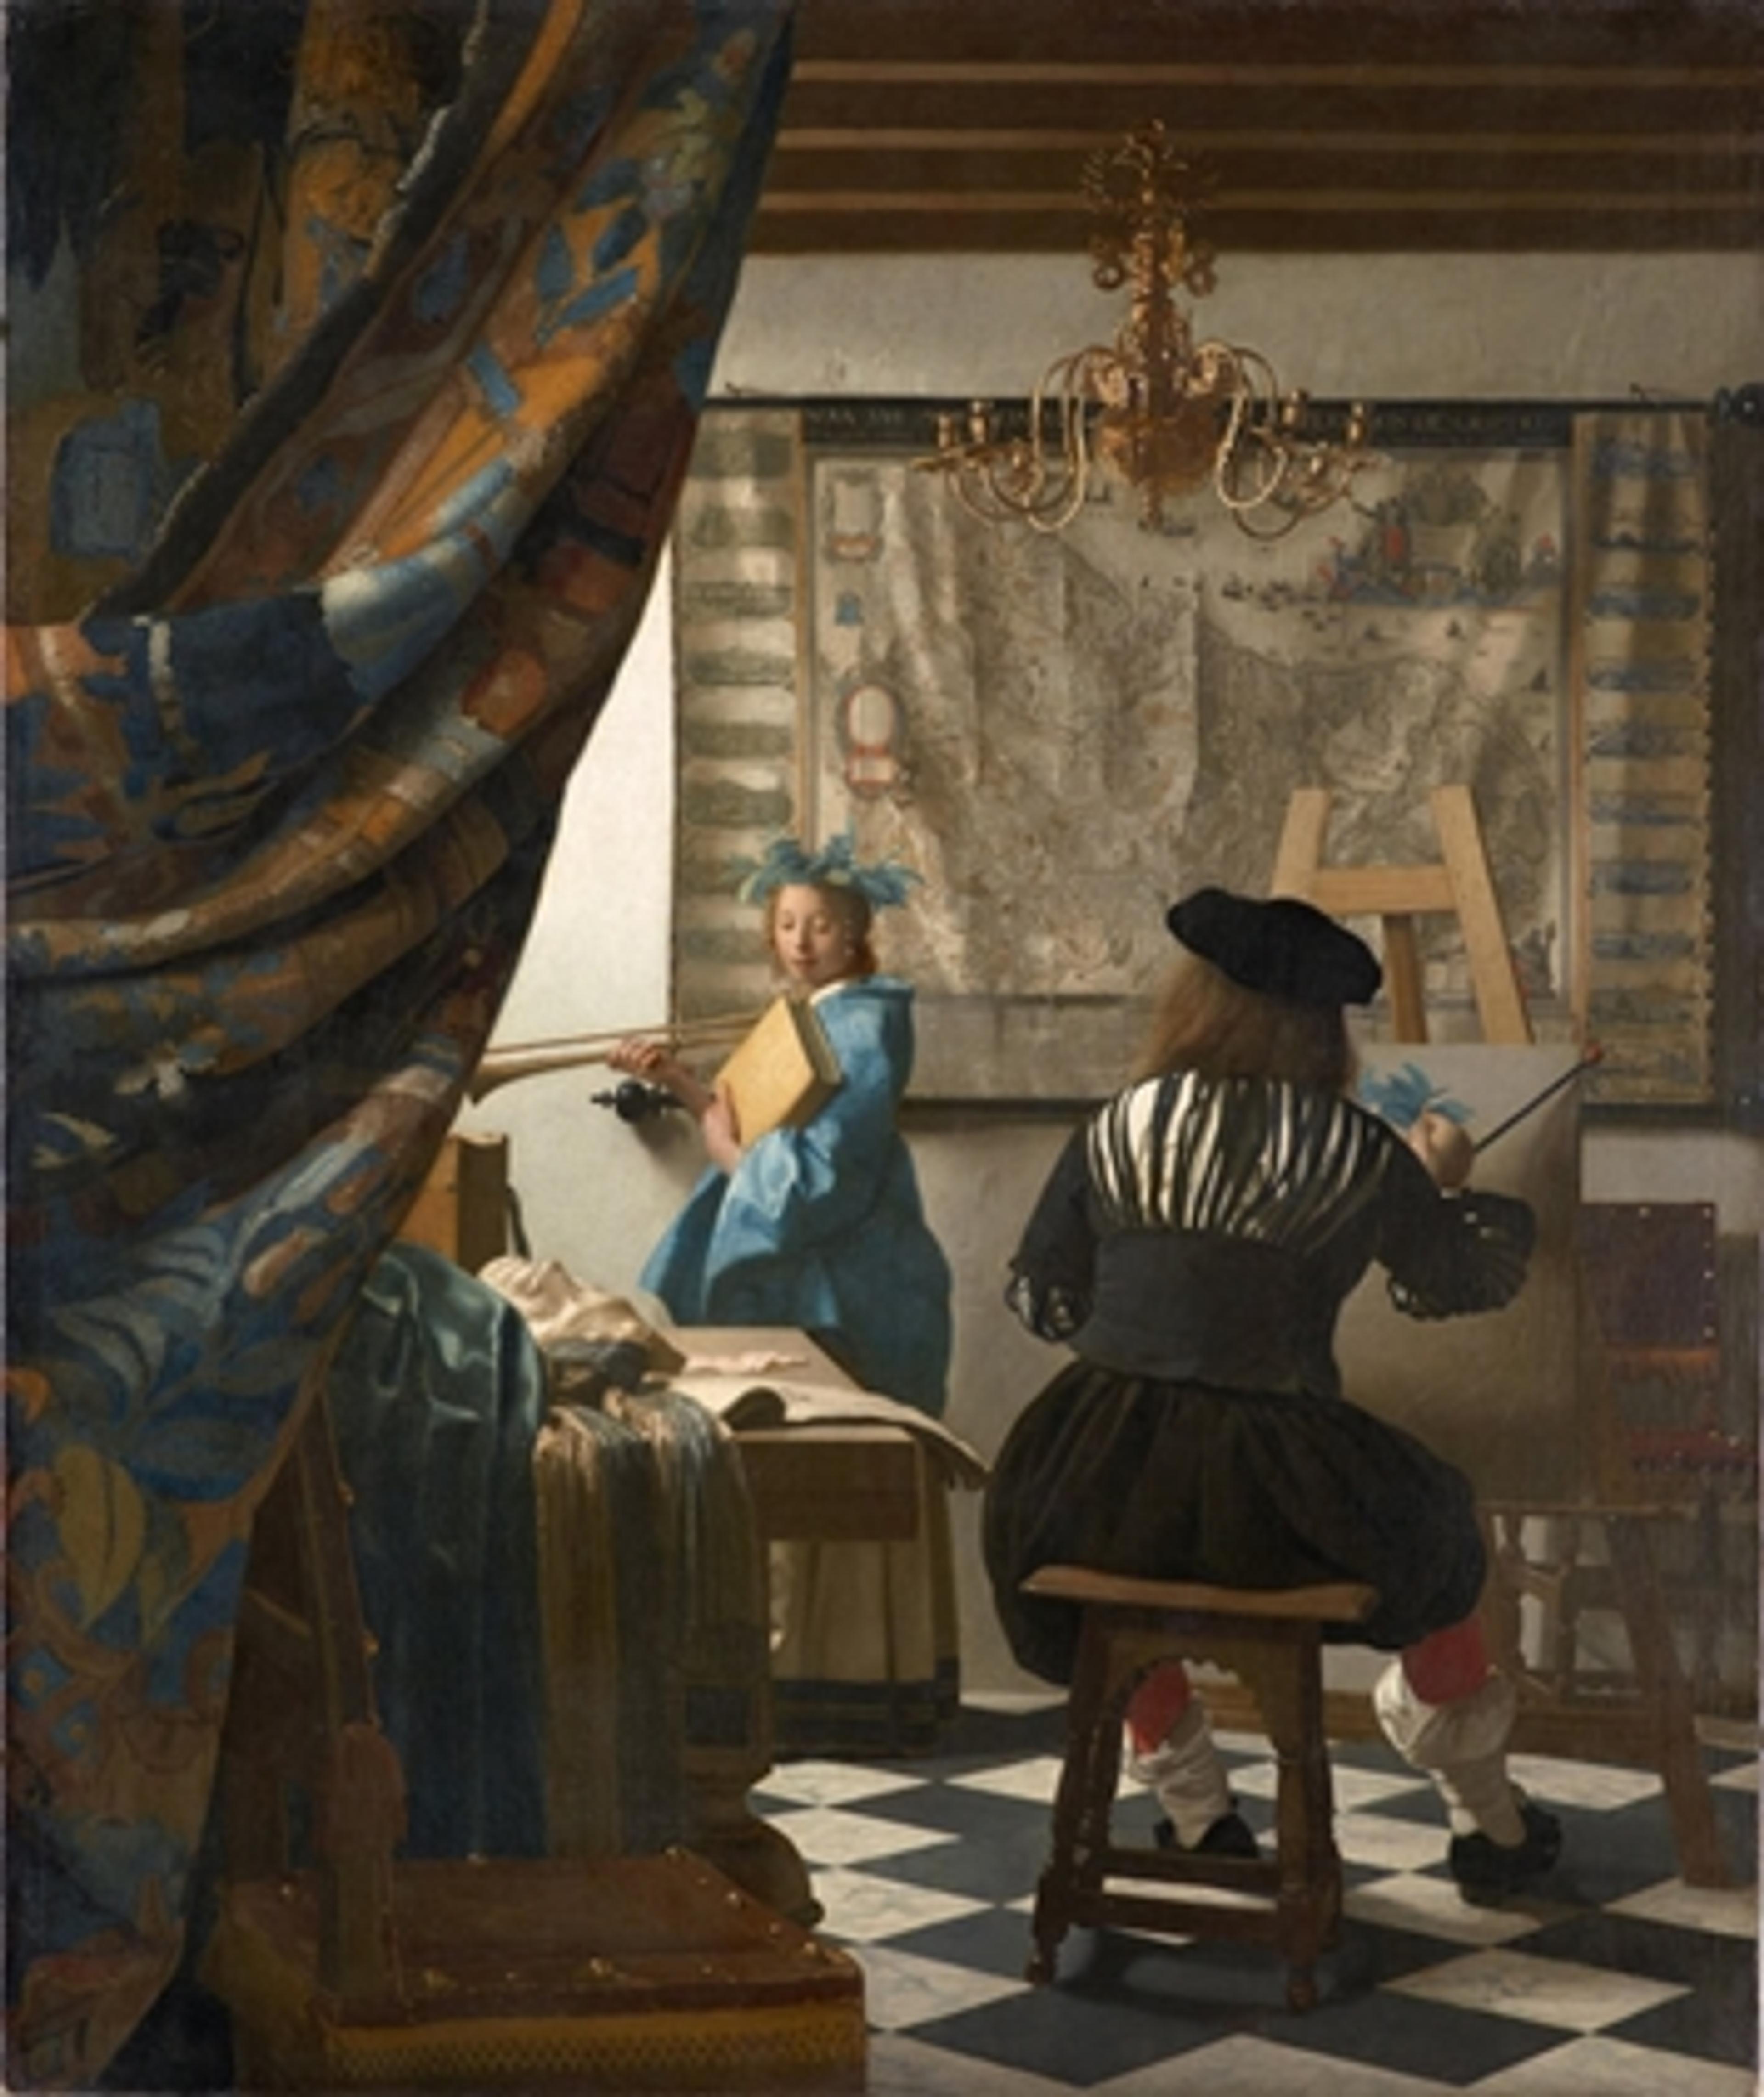 'The Allegory of Painting' by Johannes Vermeer | An oil on canvas painting showing an artist painting a model